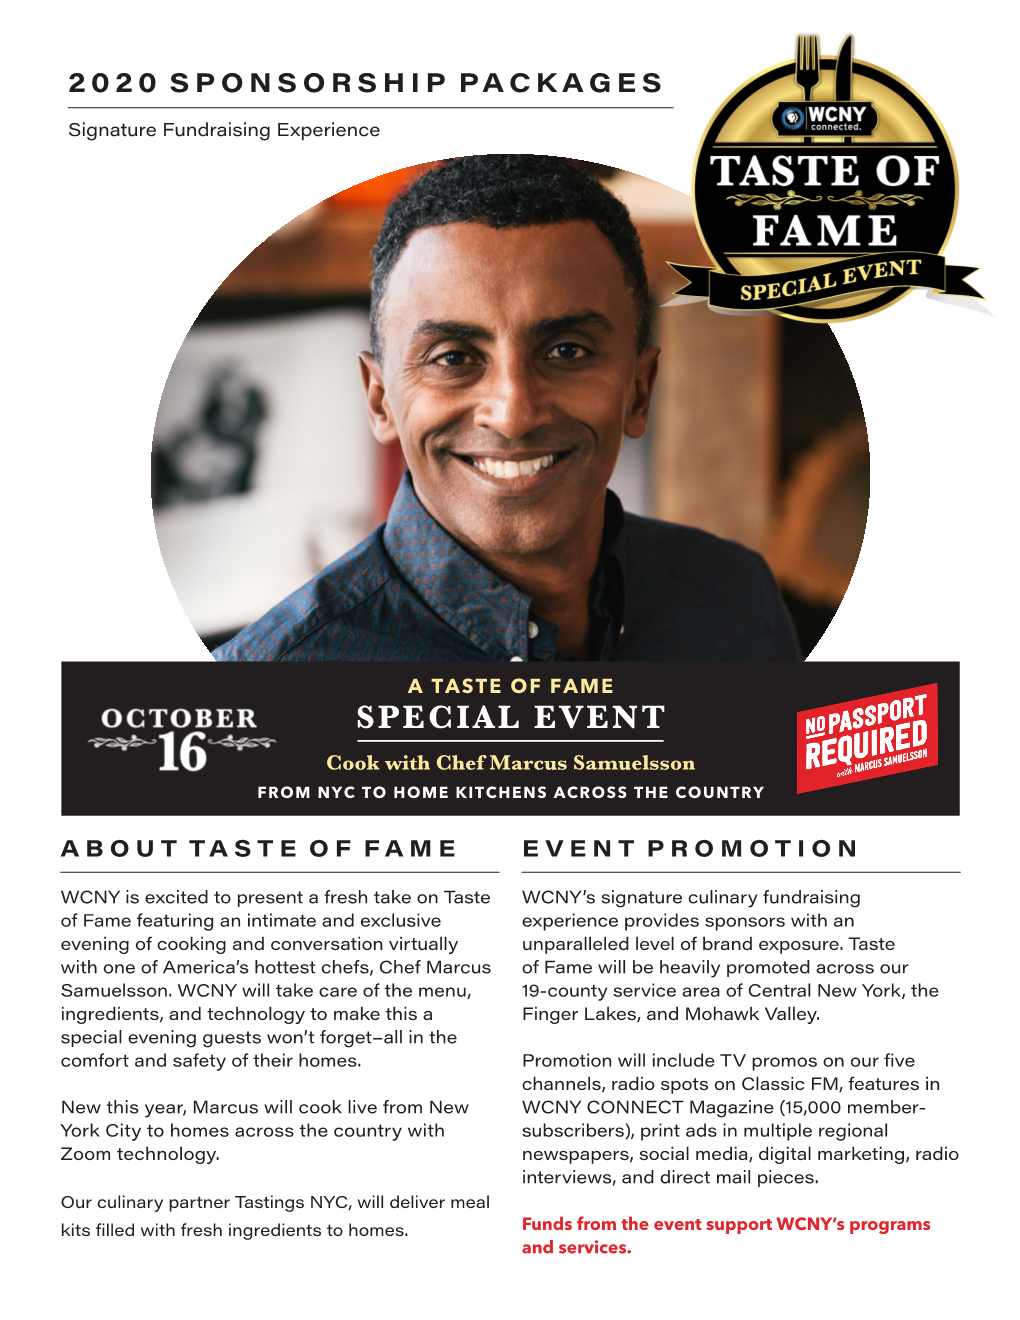 SPECIAL EVENT Cook with Chef Marcus Samuelsson from NYC to HOME KITCHENS ACROSS the COUNTRY